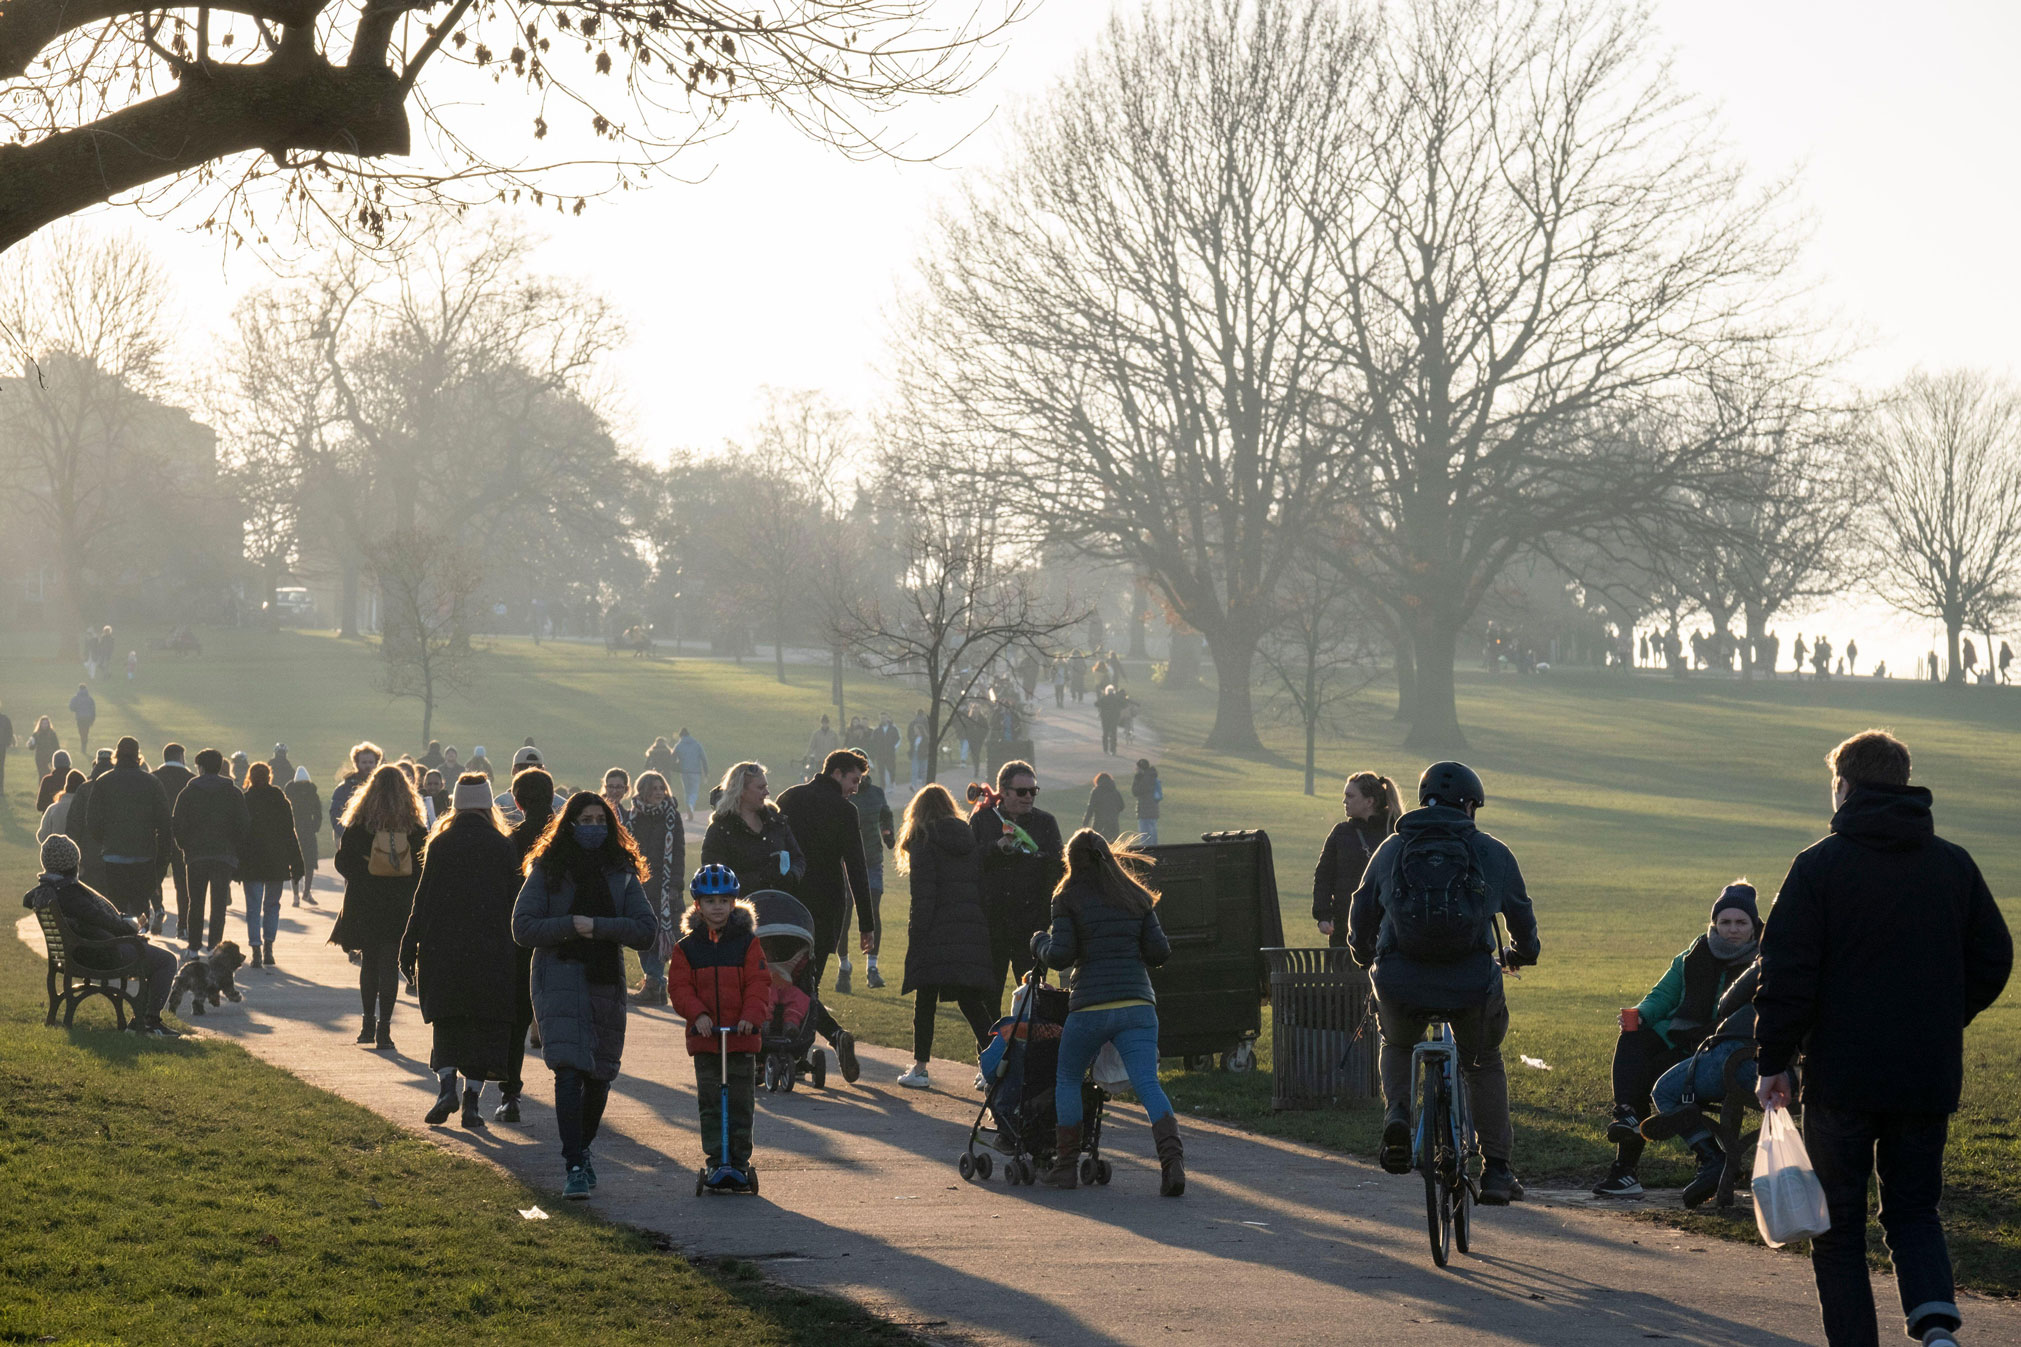 Lots of people, including children, walking, scootering, cycling and running along a path through grass and trees in a park. 